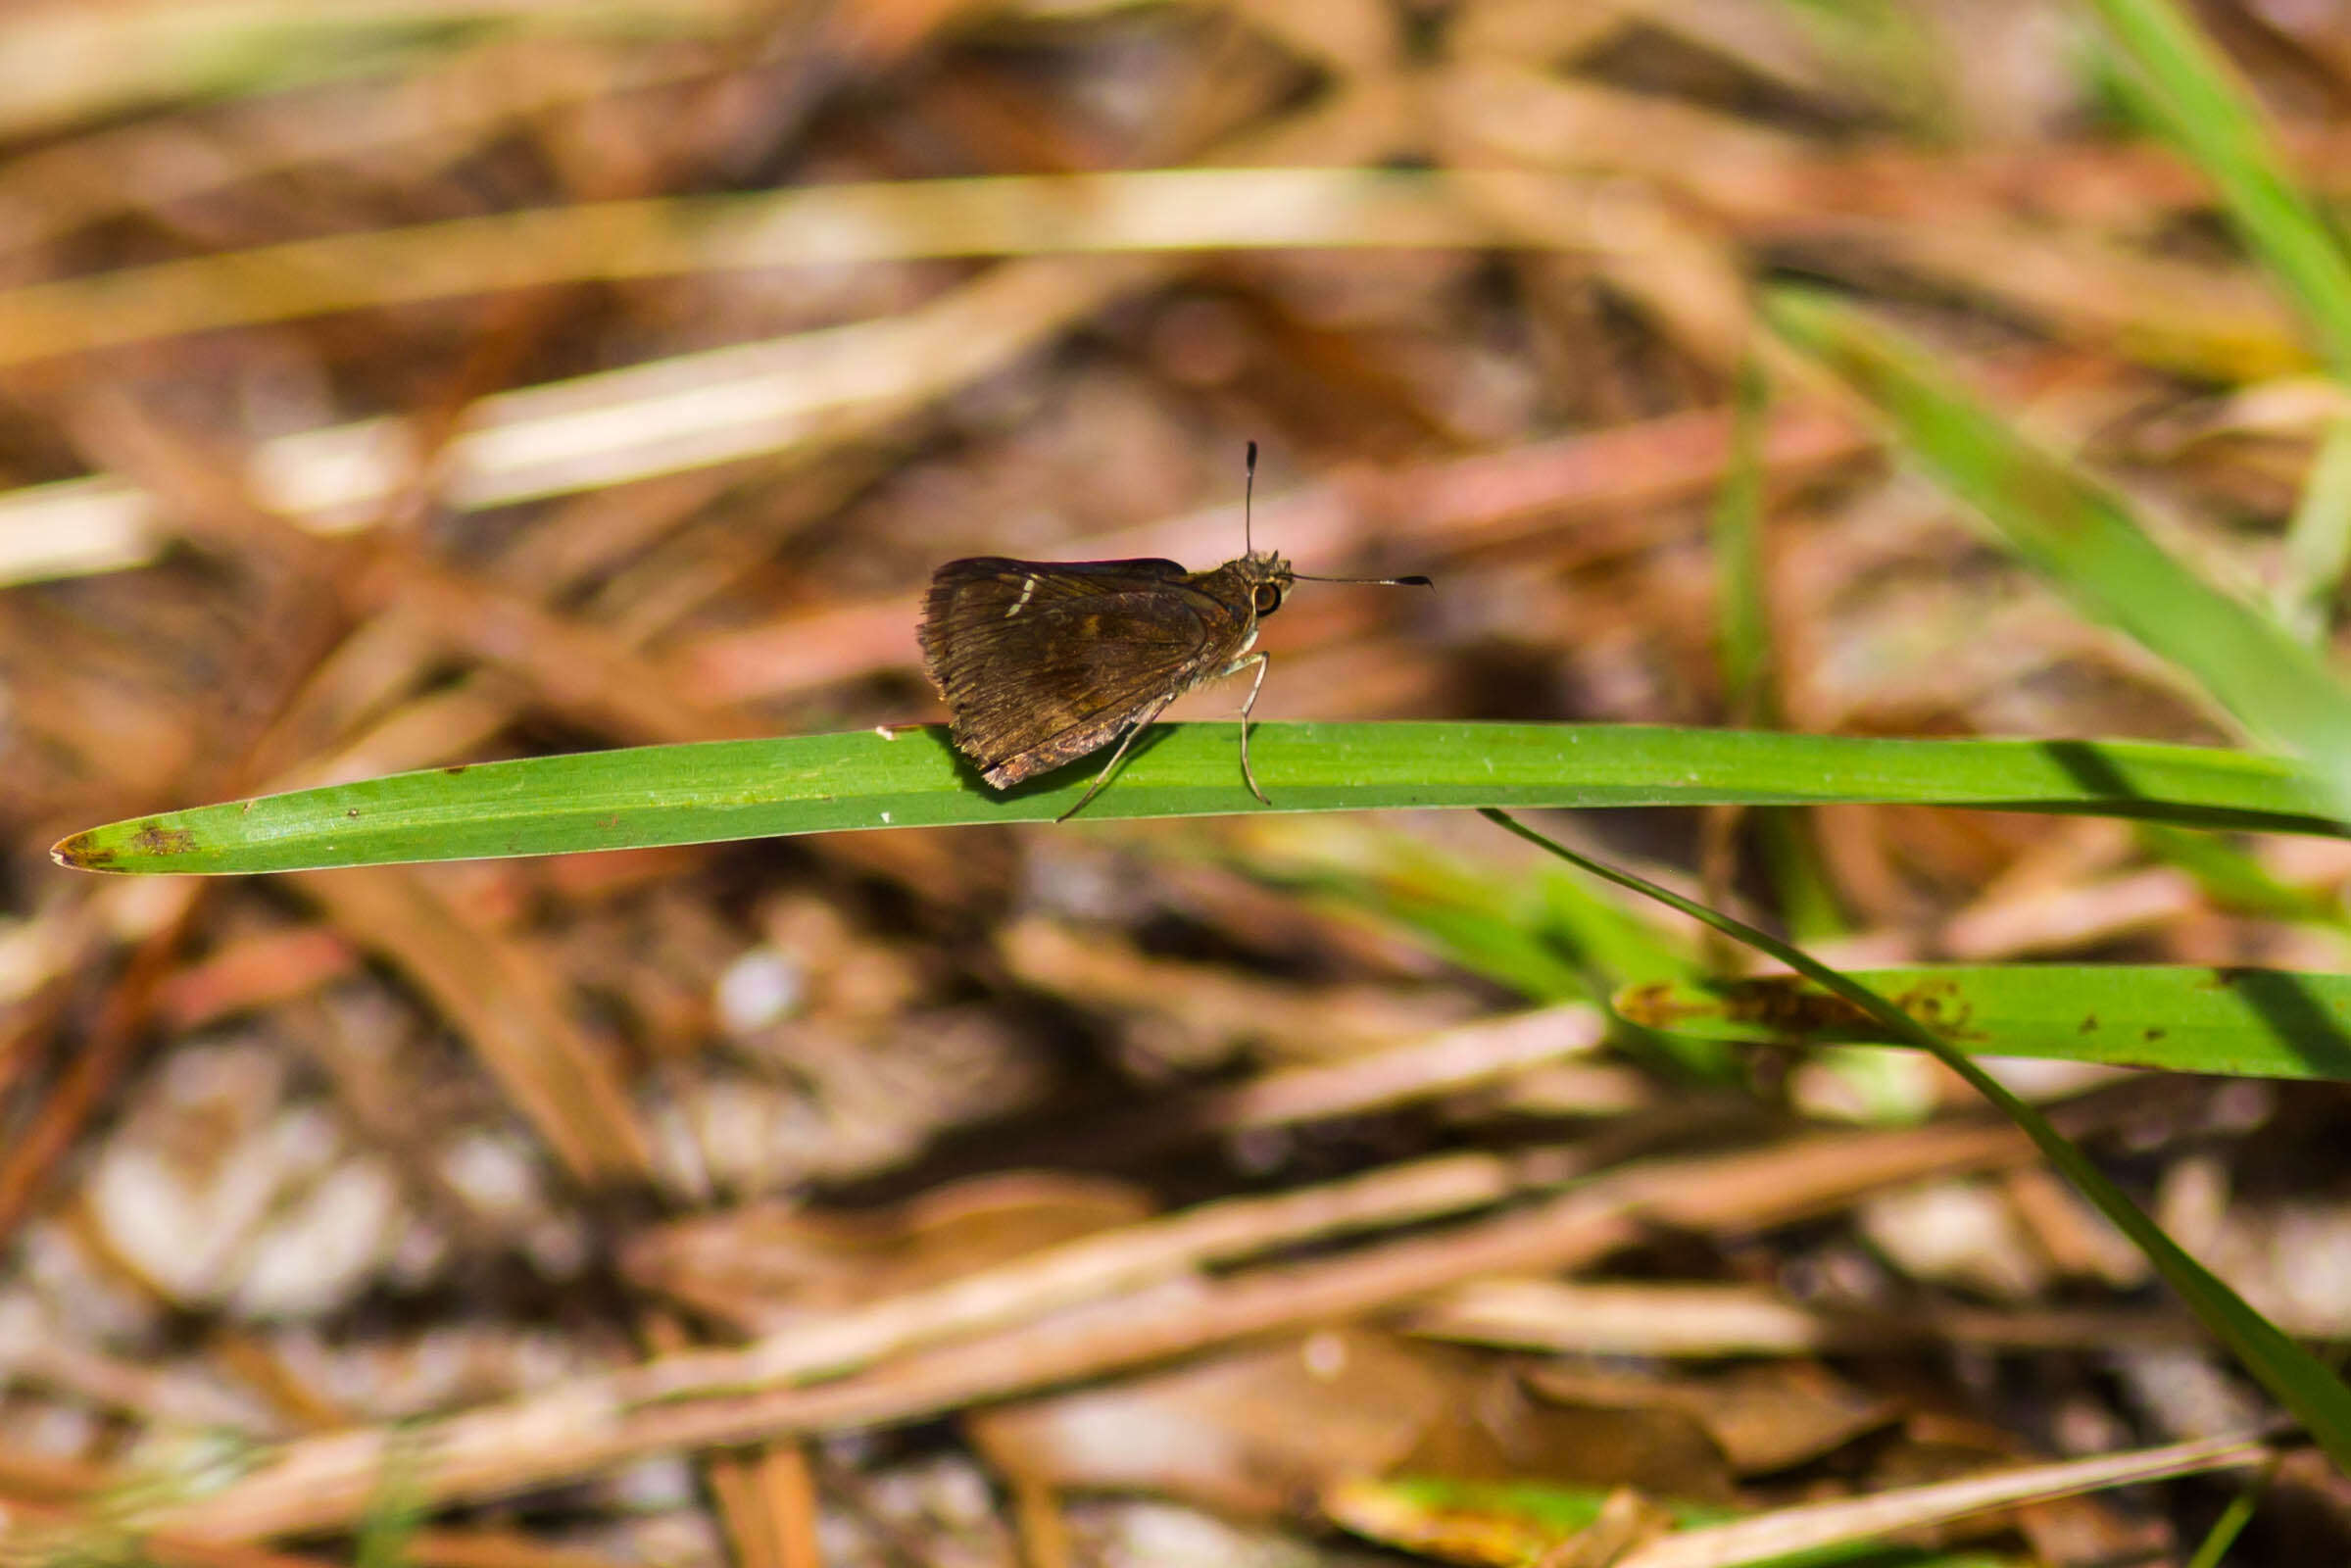 Image of Clouded Skipper